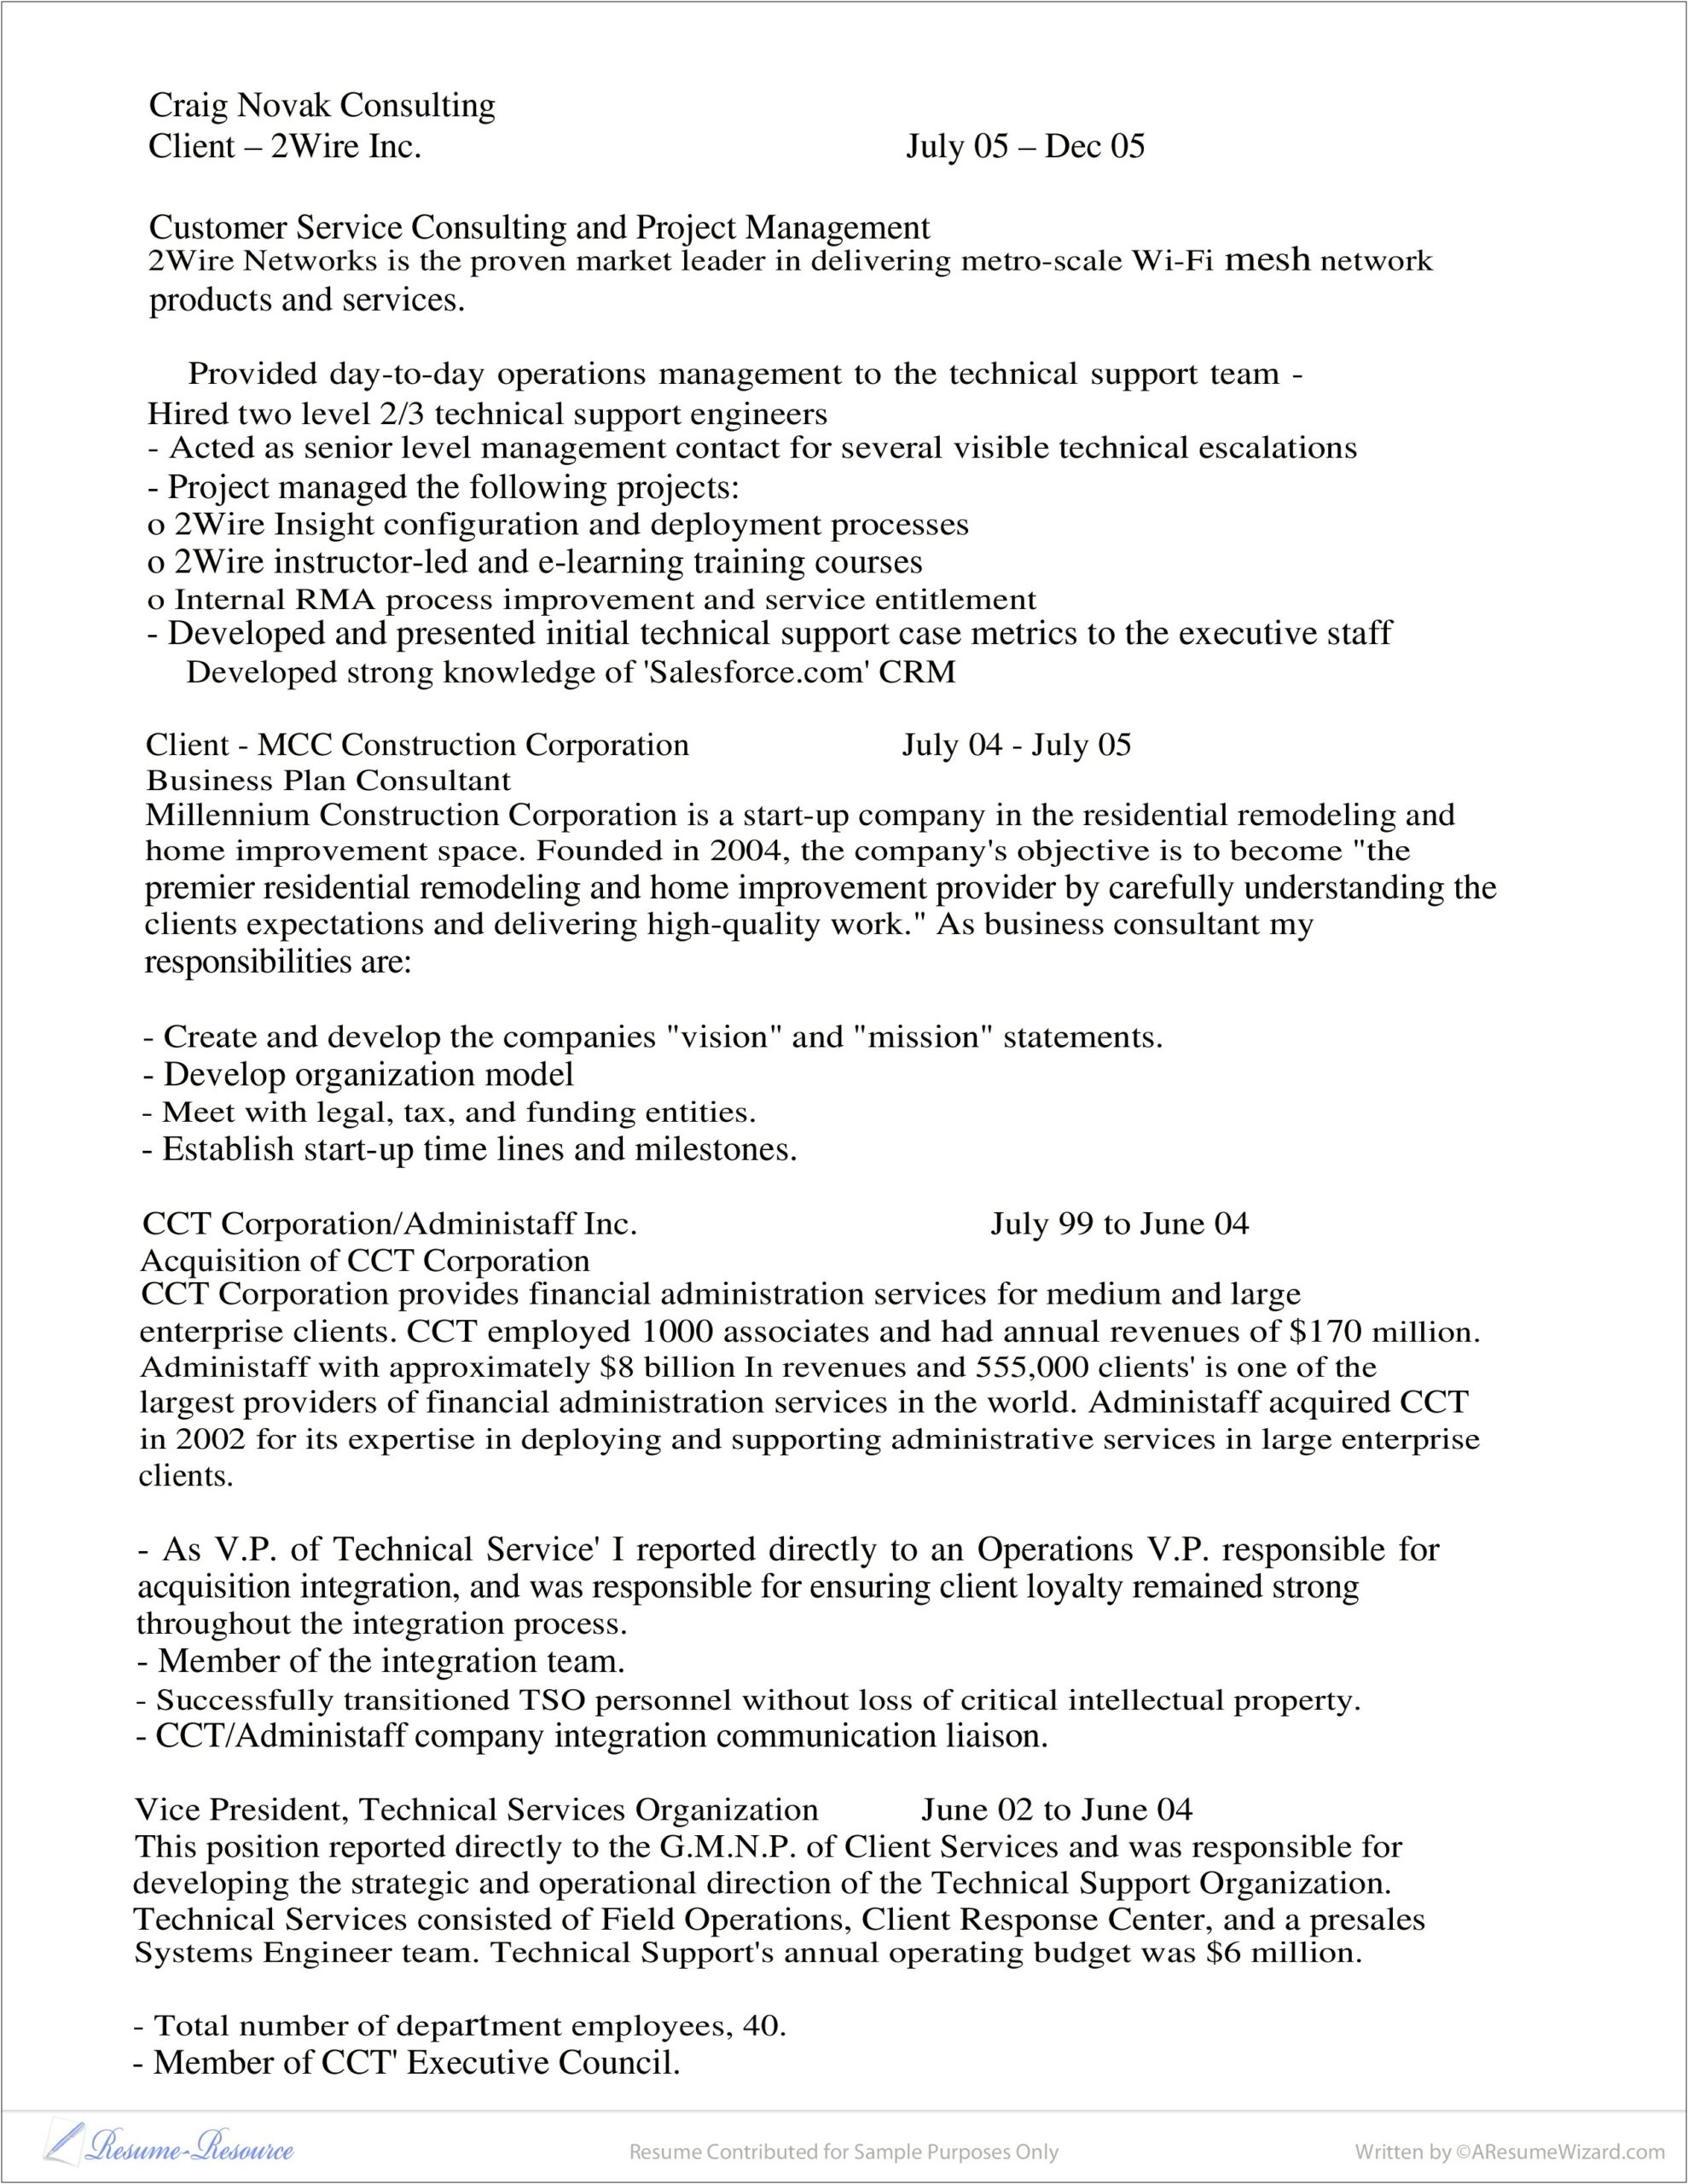 Sample Resume For Management Consulting